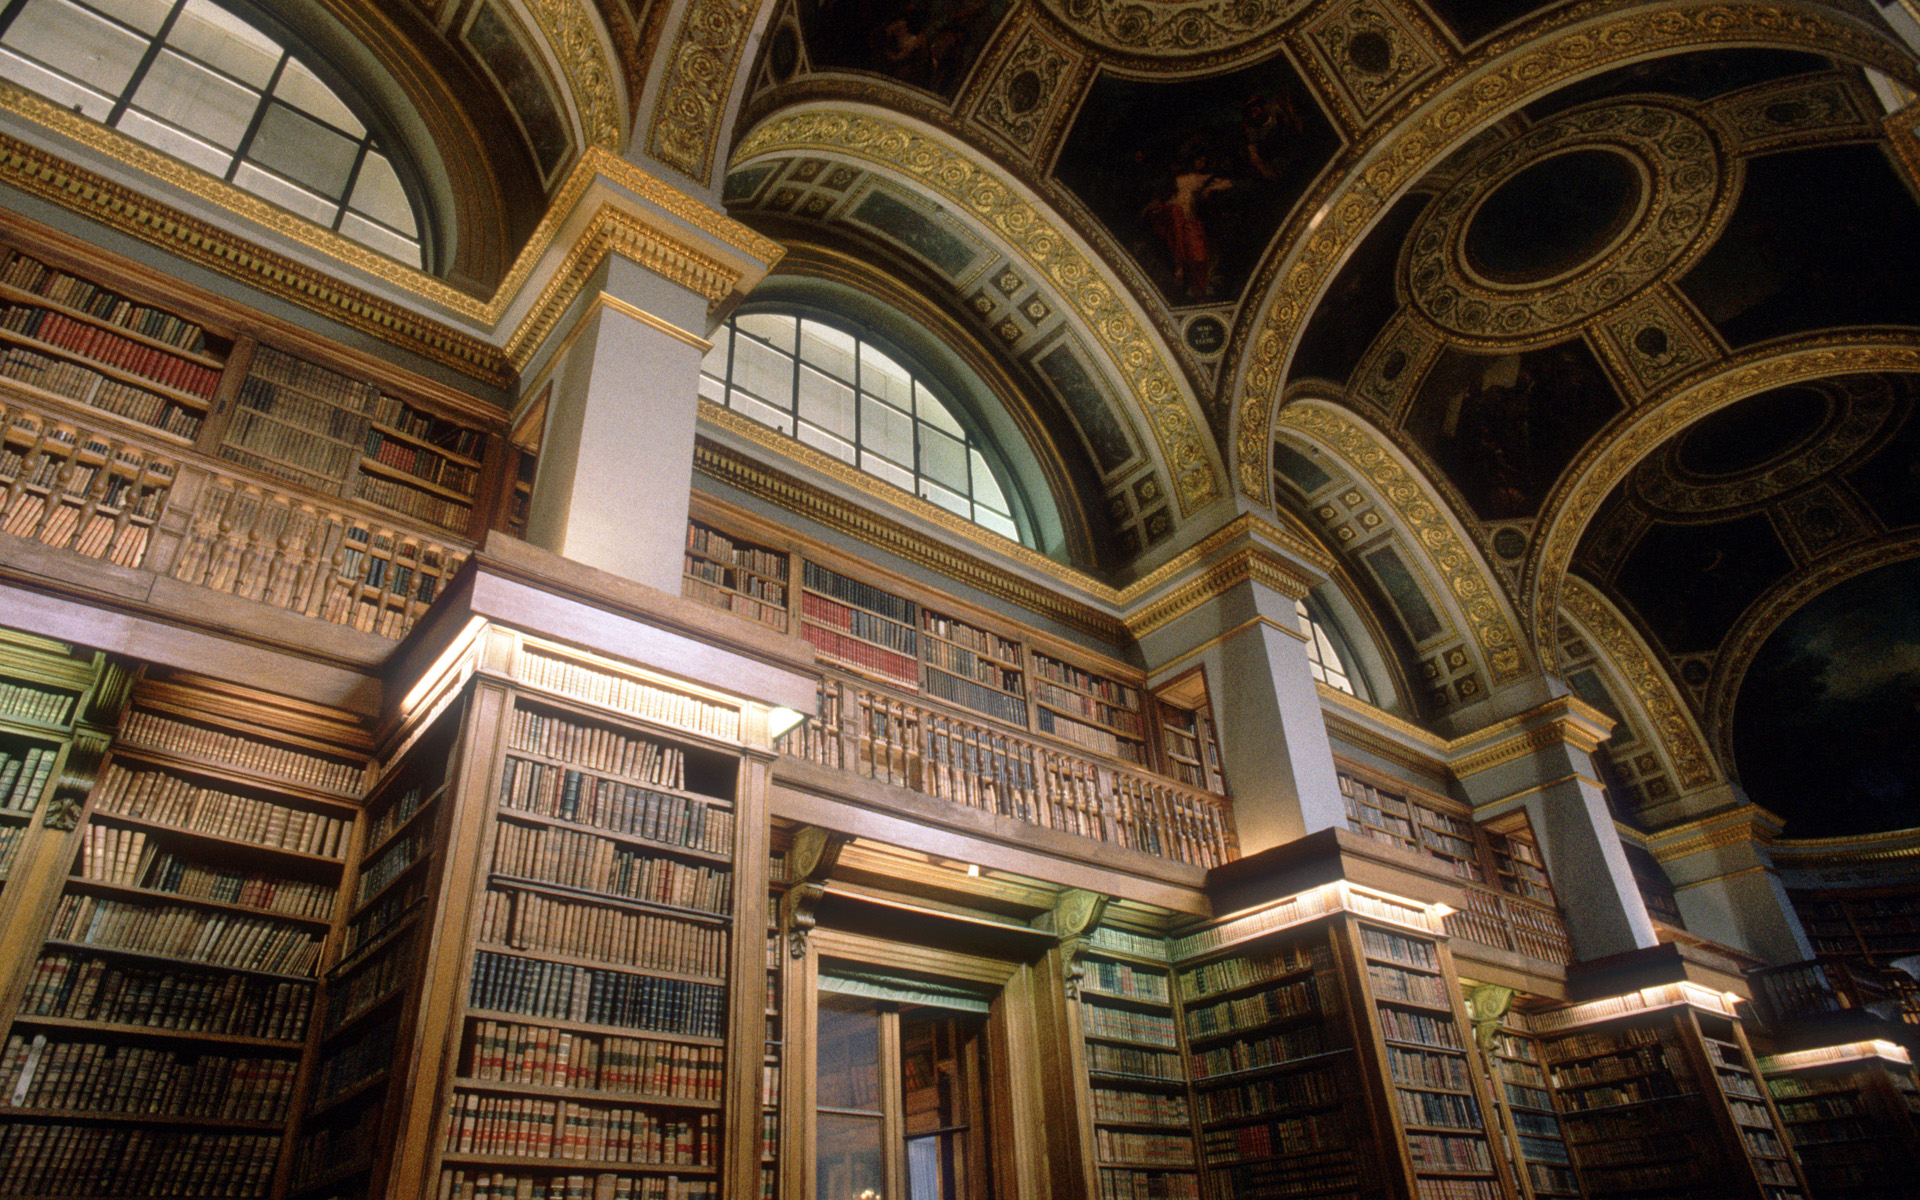 Man Made Library HD Wallpaper | Background Image